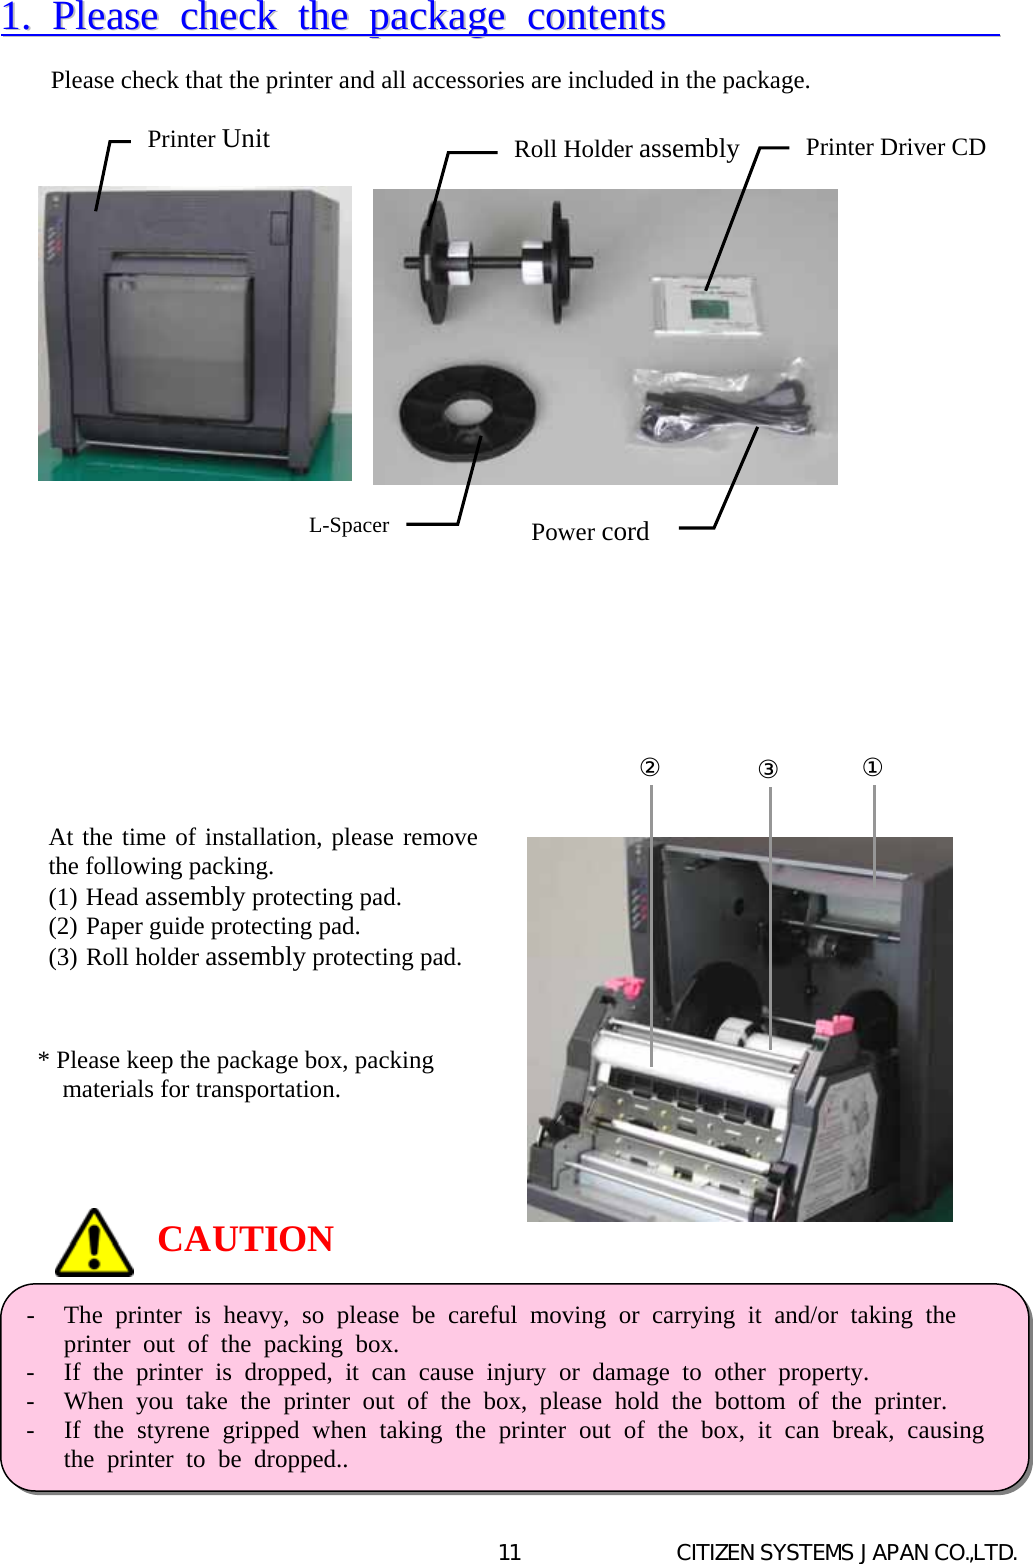   CITIZEN SYSTEMS JAPAN CO.,LTD. 1111..  PPlleeaassee  cchheecckk  tthhee  ppaacckkaaggee  ccoonntteennttss                           Please check that the printer and all accessories are included in the package.                                                    CAUTION -  The printer is heavy, so please be careful moving or carrying it and/or taking theprinter out of the packing box. -  If the printer is dropped, it can cause injury or damage to other property. -  When you take the printer out of the box, please hold the bottom of the printer. -  If the styrene gripped when taking the printer out of the box, it can break, causing  the printer to be dropped.. Printer Unit L-SpacerPower cordRoll Holder assembly Printer Driver CDAt the time of installation, please removethe following packing. (1) Head assembly protecting pad. (2) Paper guide protecting pad. (3) Roll holder assembly protecting pad.   * Please keep the package box, packing materials for transportation.  ②③①